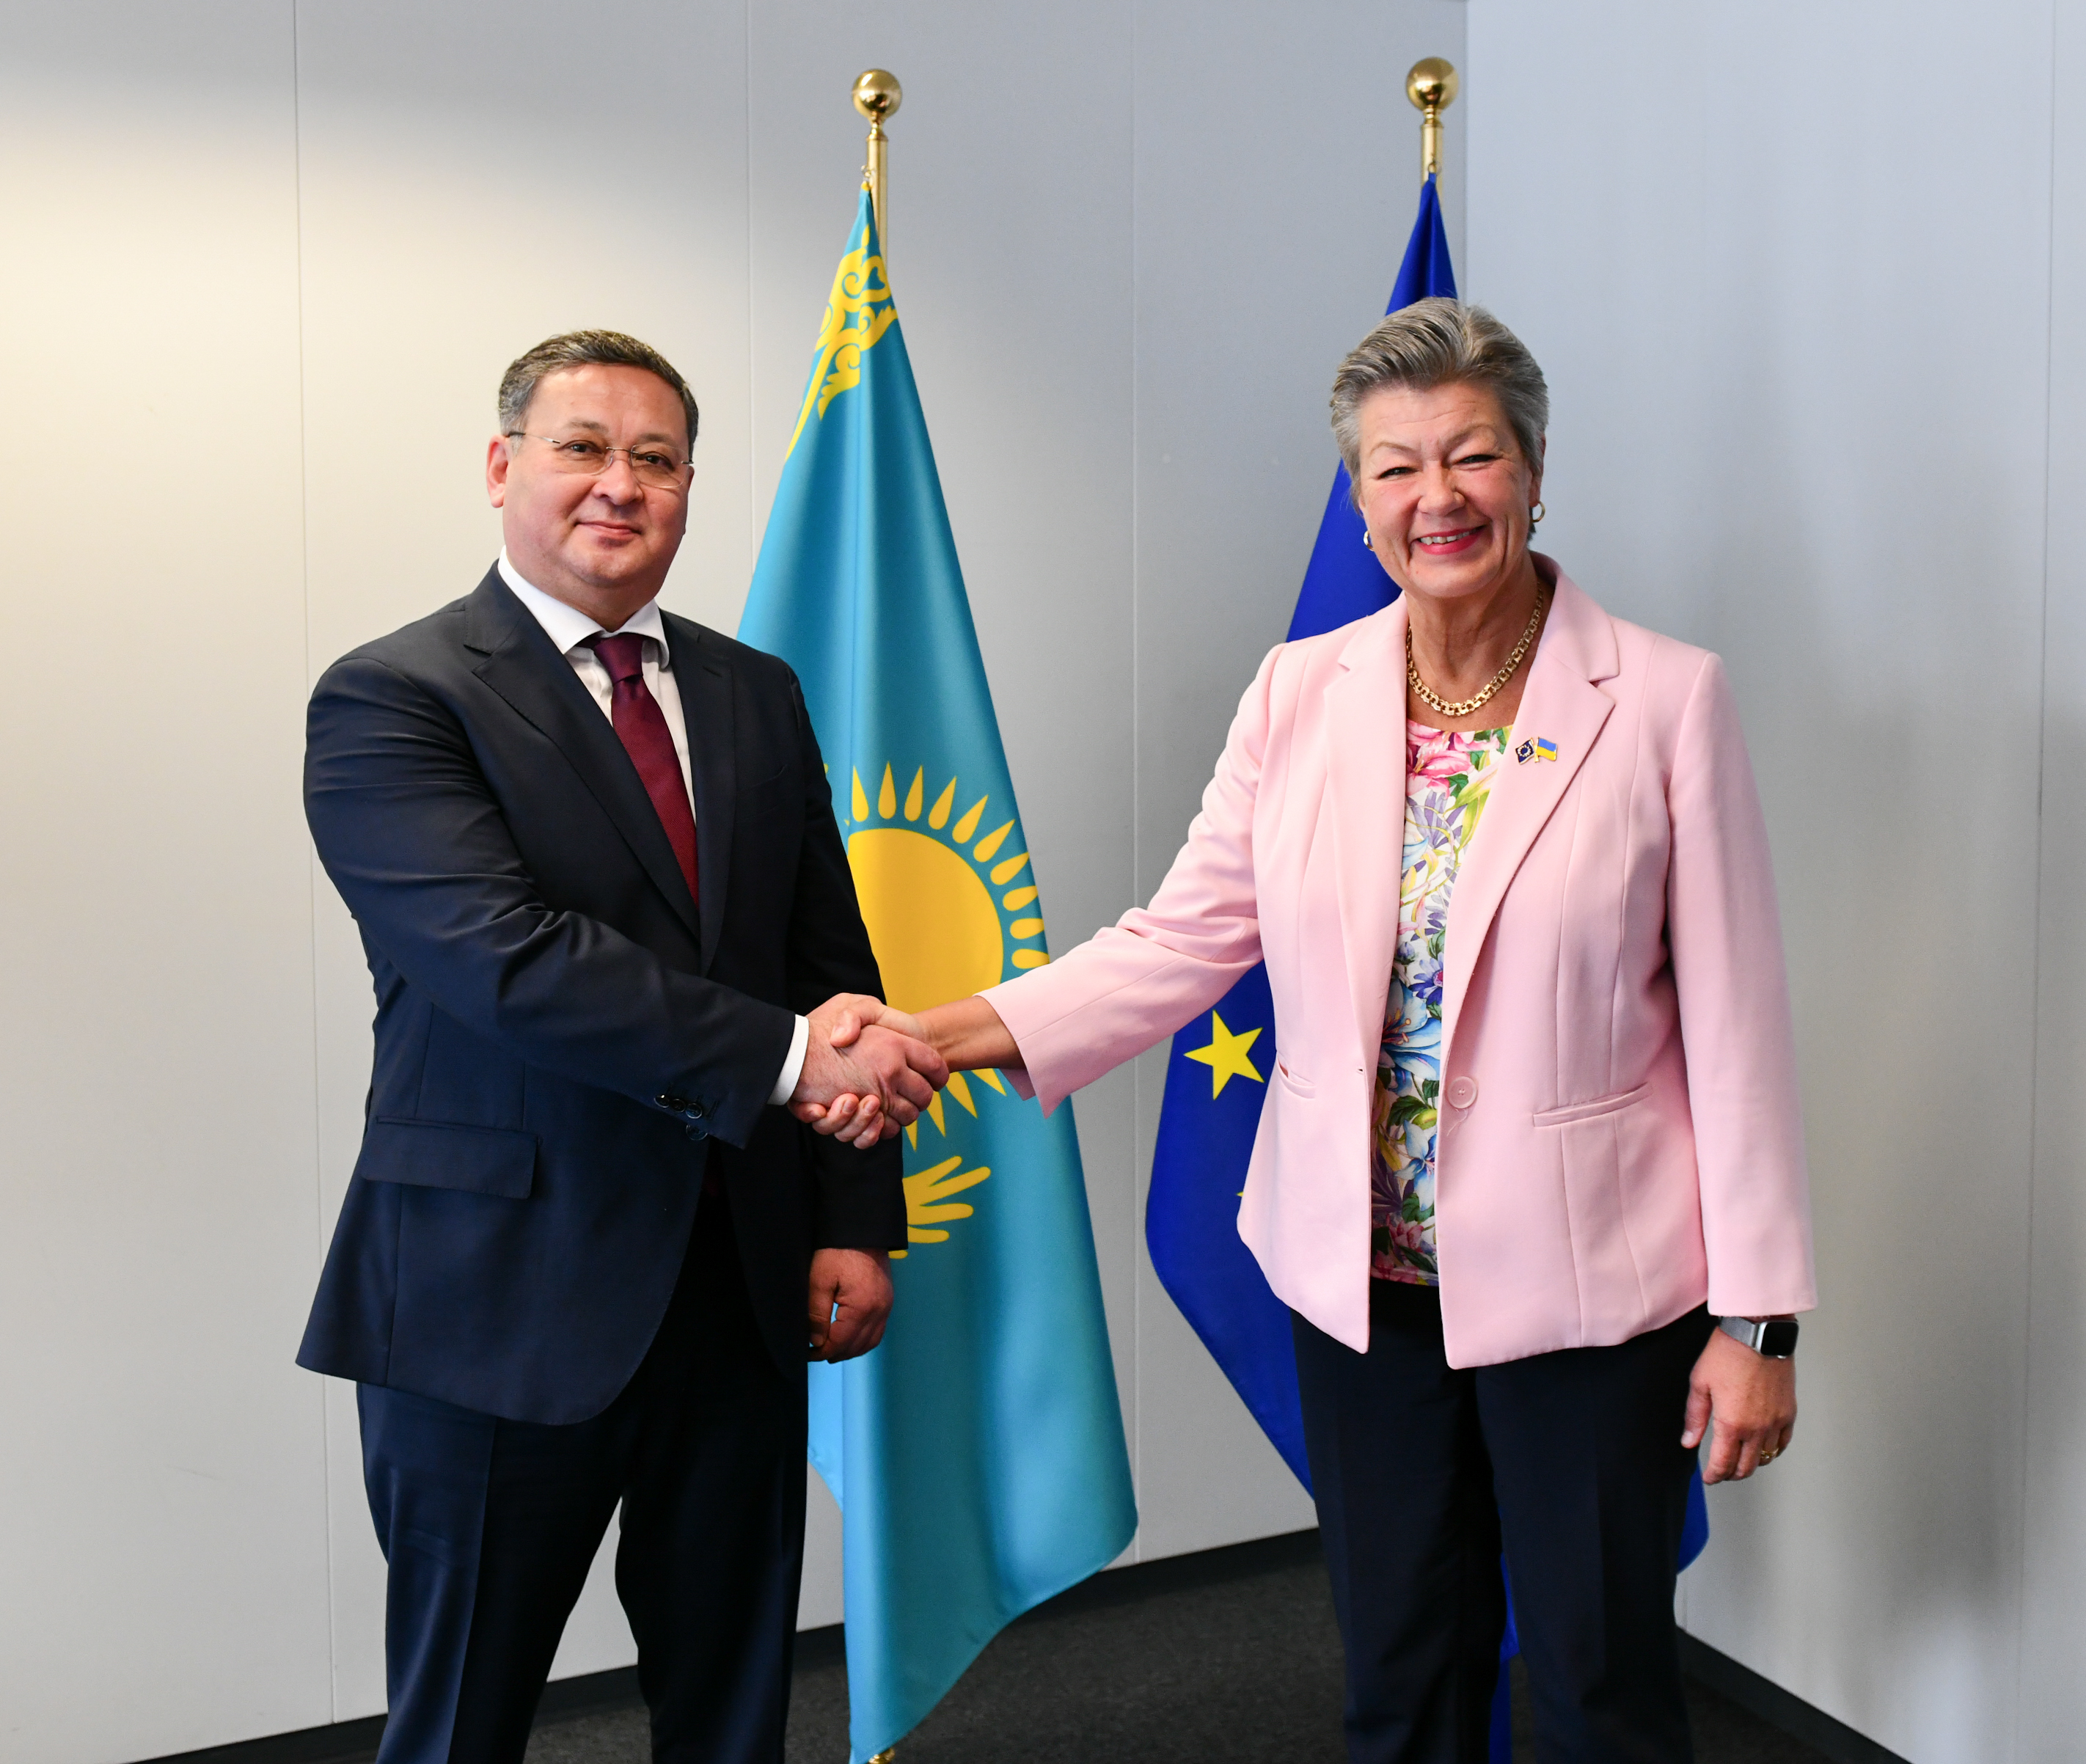 Kazakhstan and the European Union begin official consultations on visa facilitation for citizens of the Republic of Kazakhstan